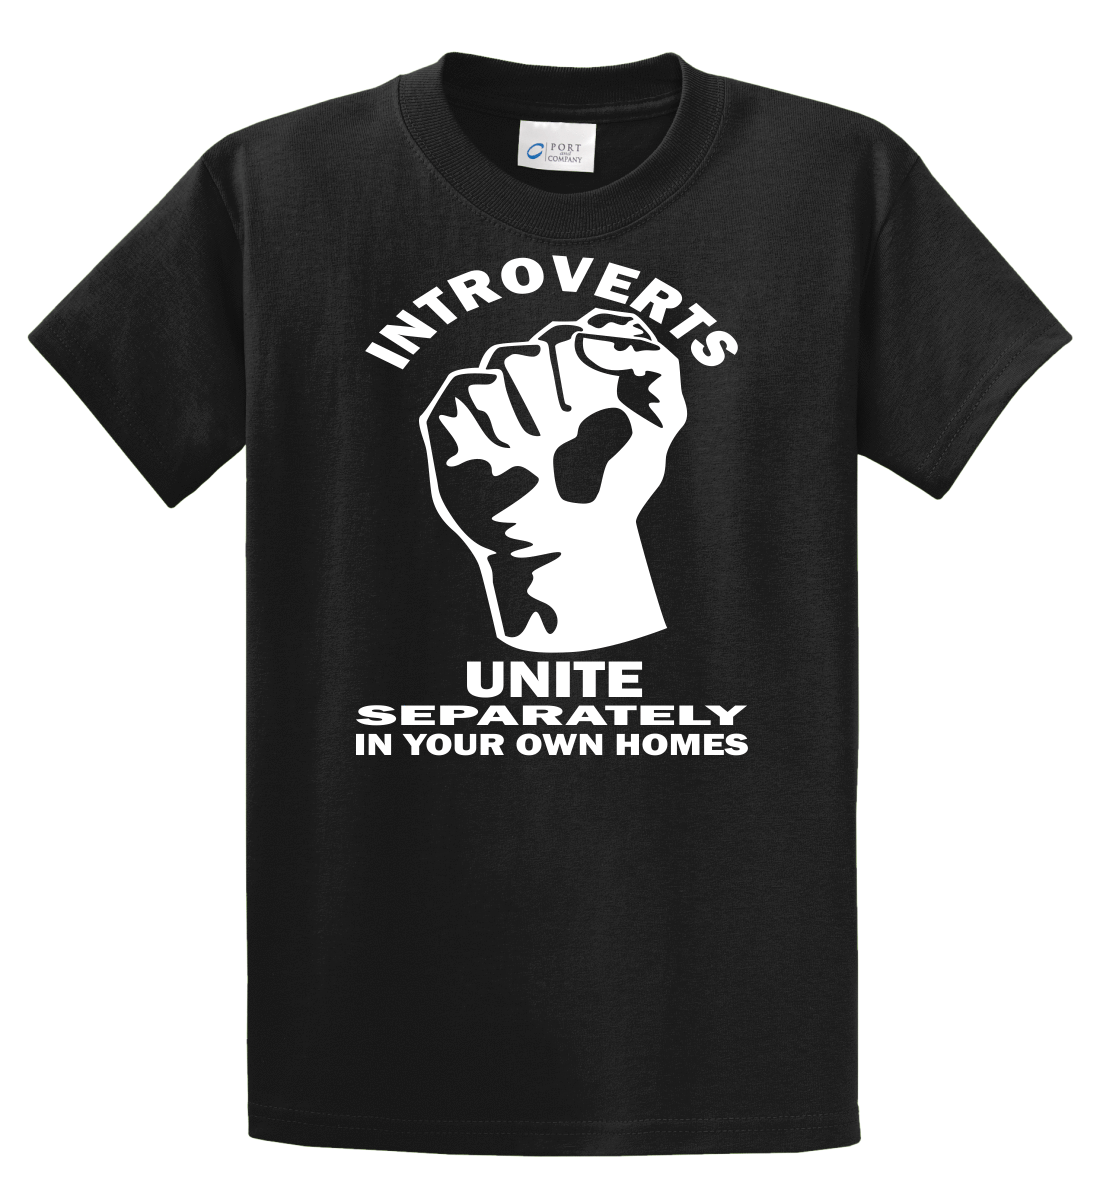 Introverts Unite Separately In Your Own Homes Funny Men's T-Shirt Size S-3xl - $19.00